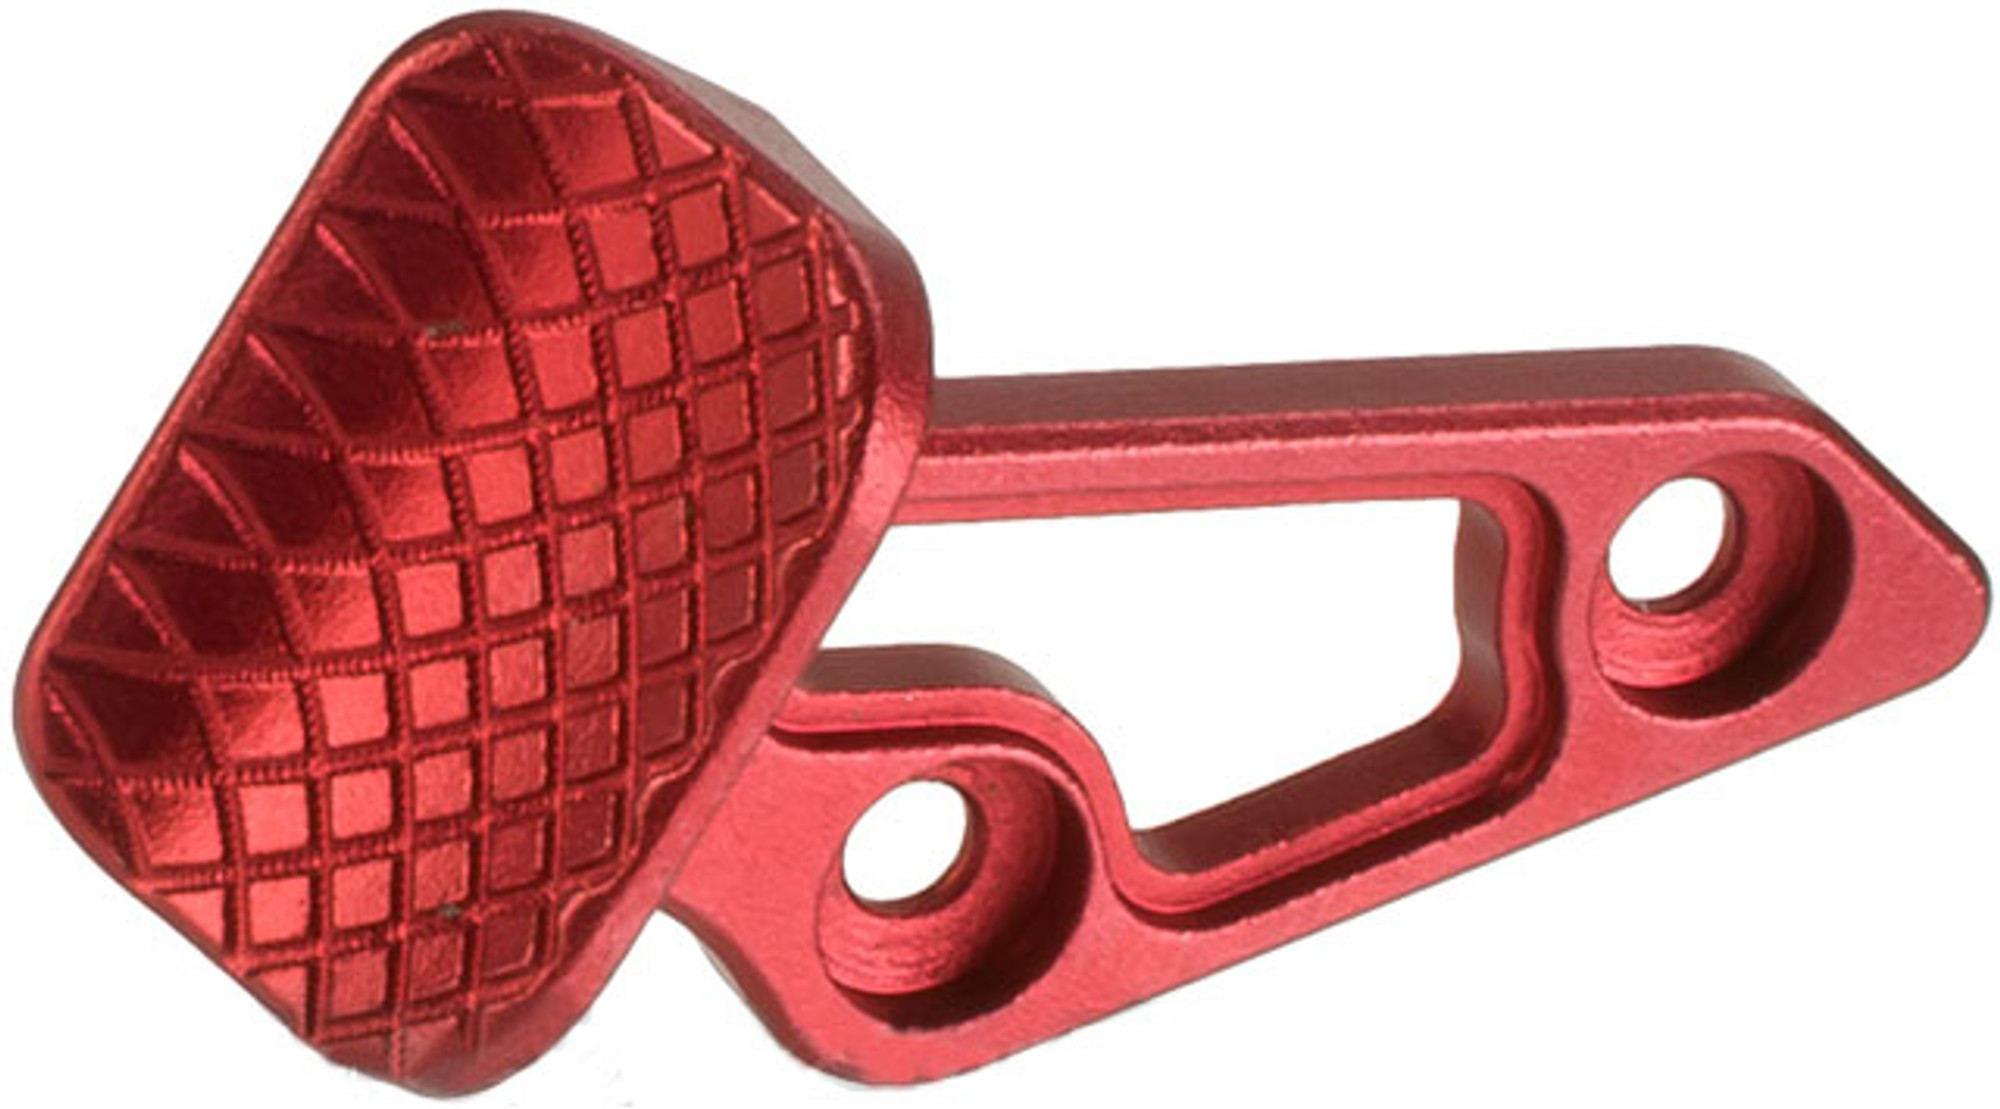 5KU Skidproof Thumb Rest for Tokyo Marui Hi-Capa Gas Powered Airsoft Pistols - Red (Right Hand Version)